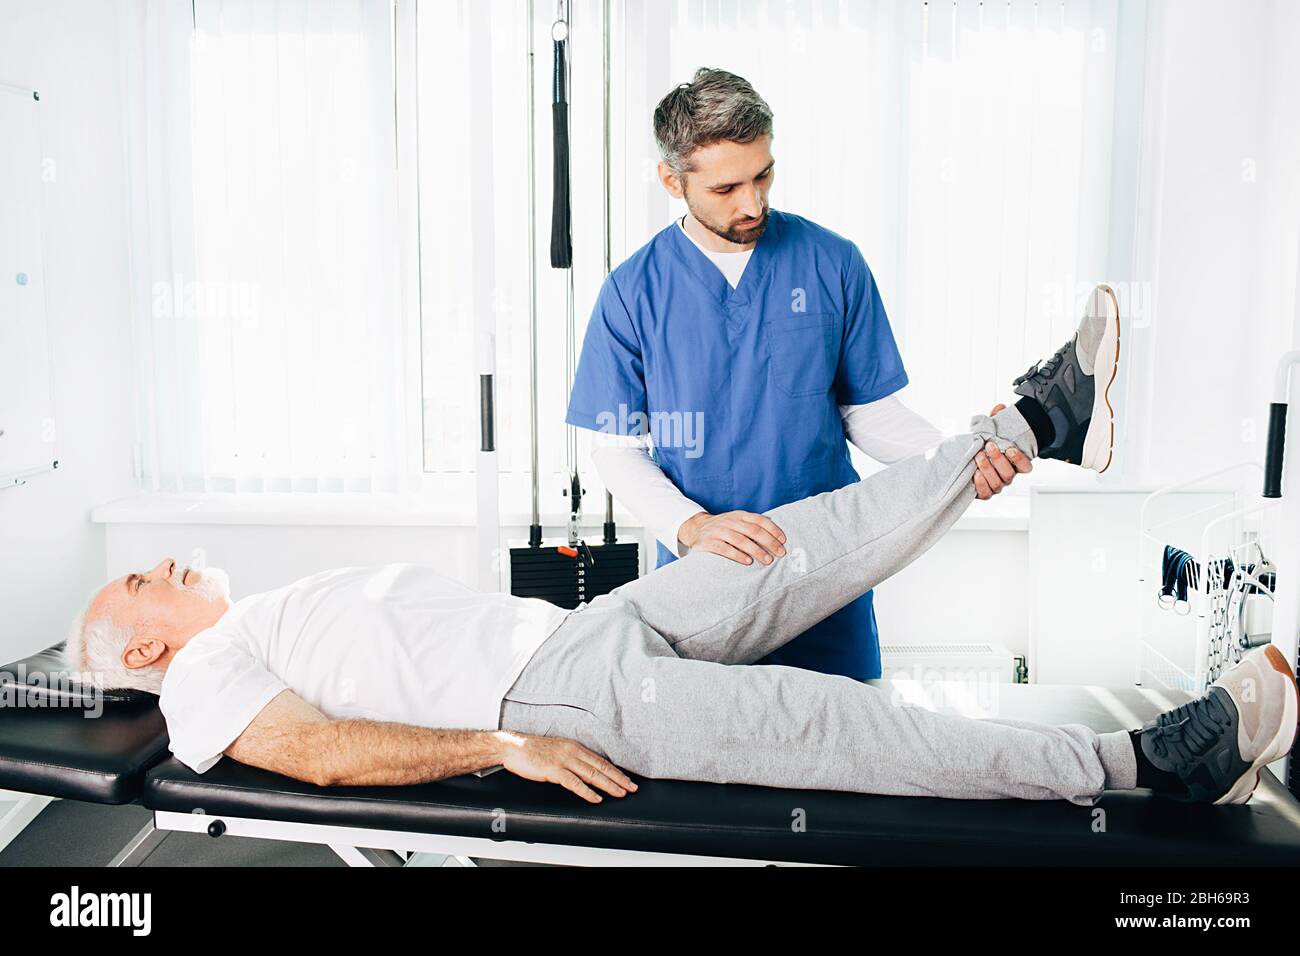 physiotherapist assisting a senior patient in recovery at wellness center. Stock Photo